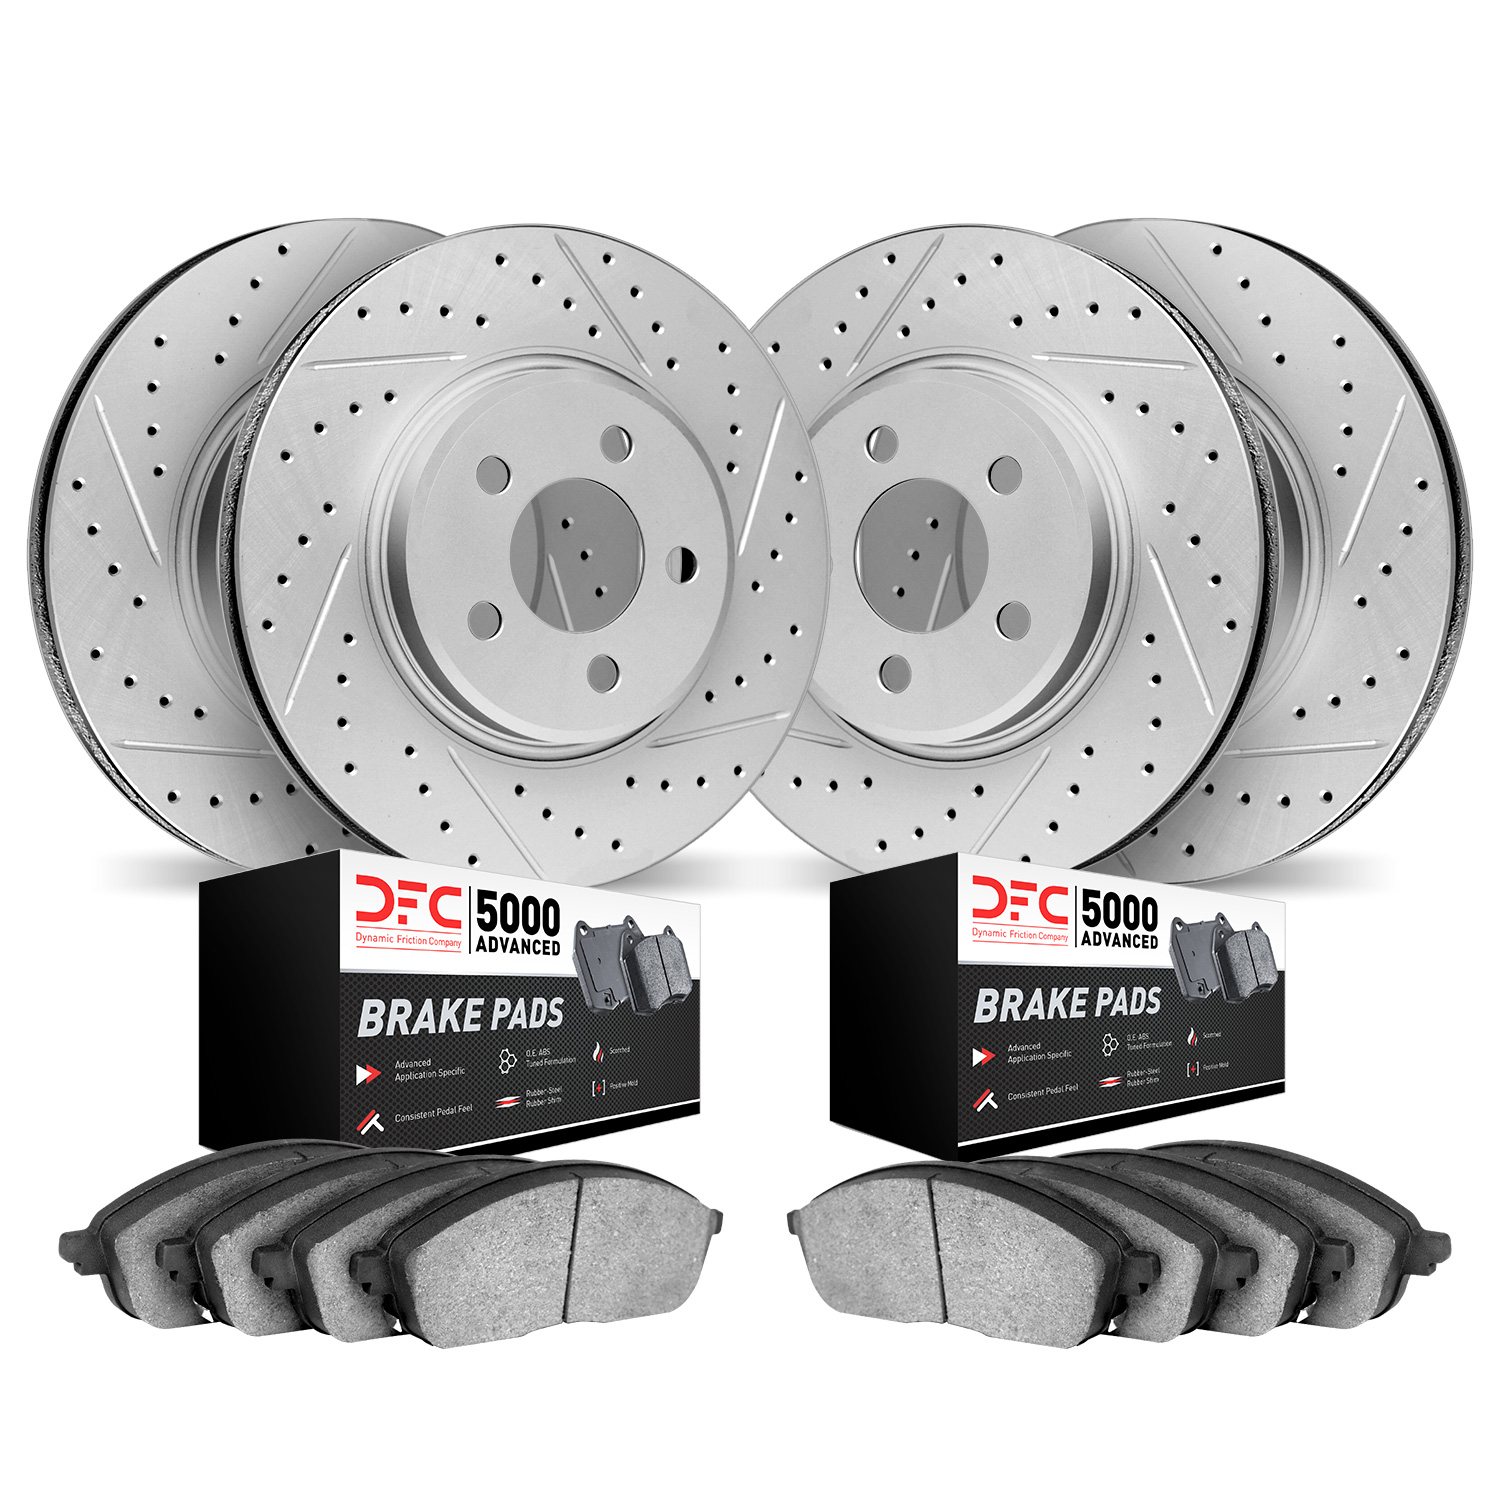 2504-74046 Geoperformance Drilled/Slotted Rotors w/5000 Advanced Brake Pads Kit, 2011-2014 Porsche, Position: Front and Rear